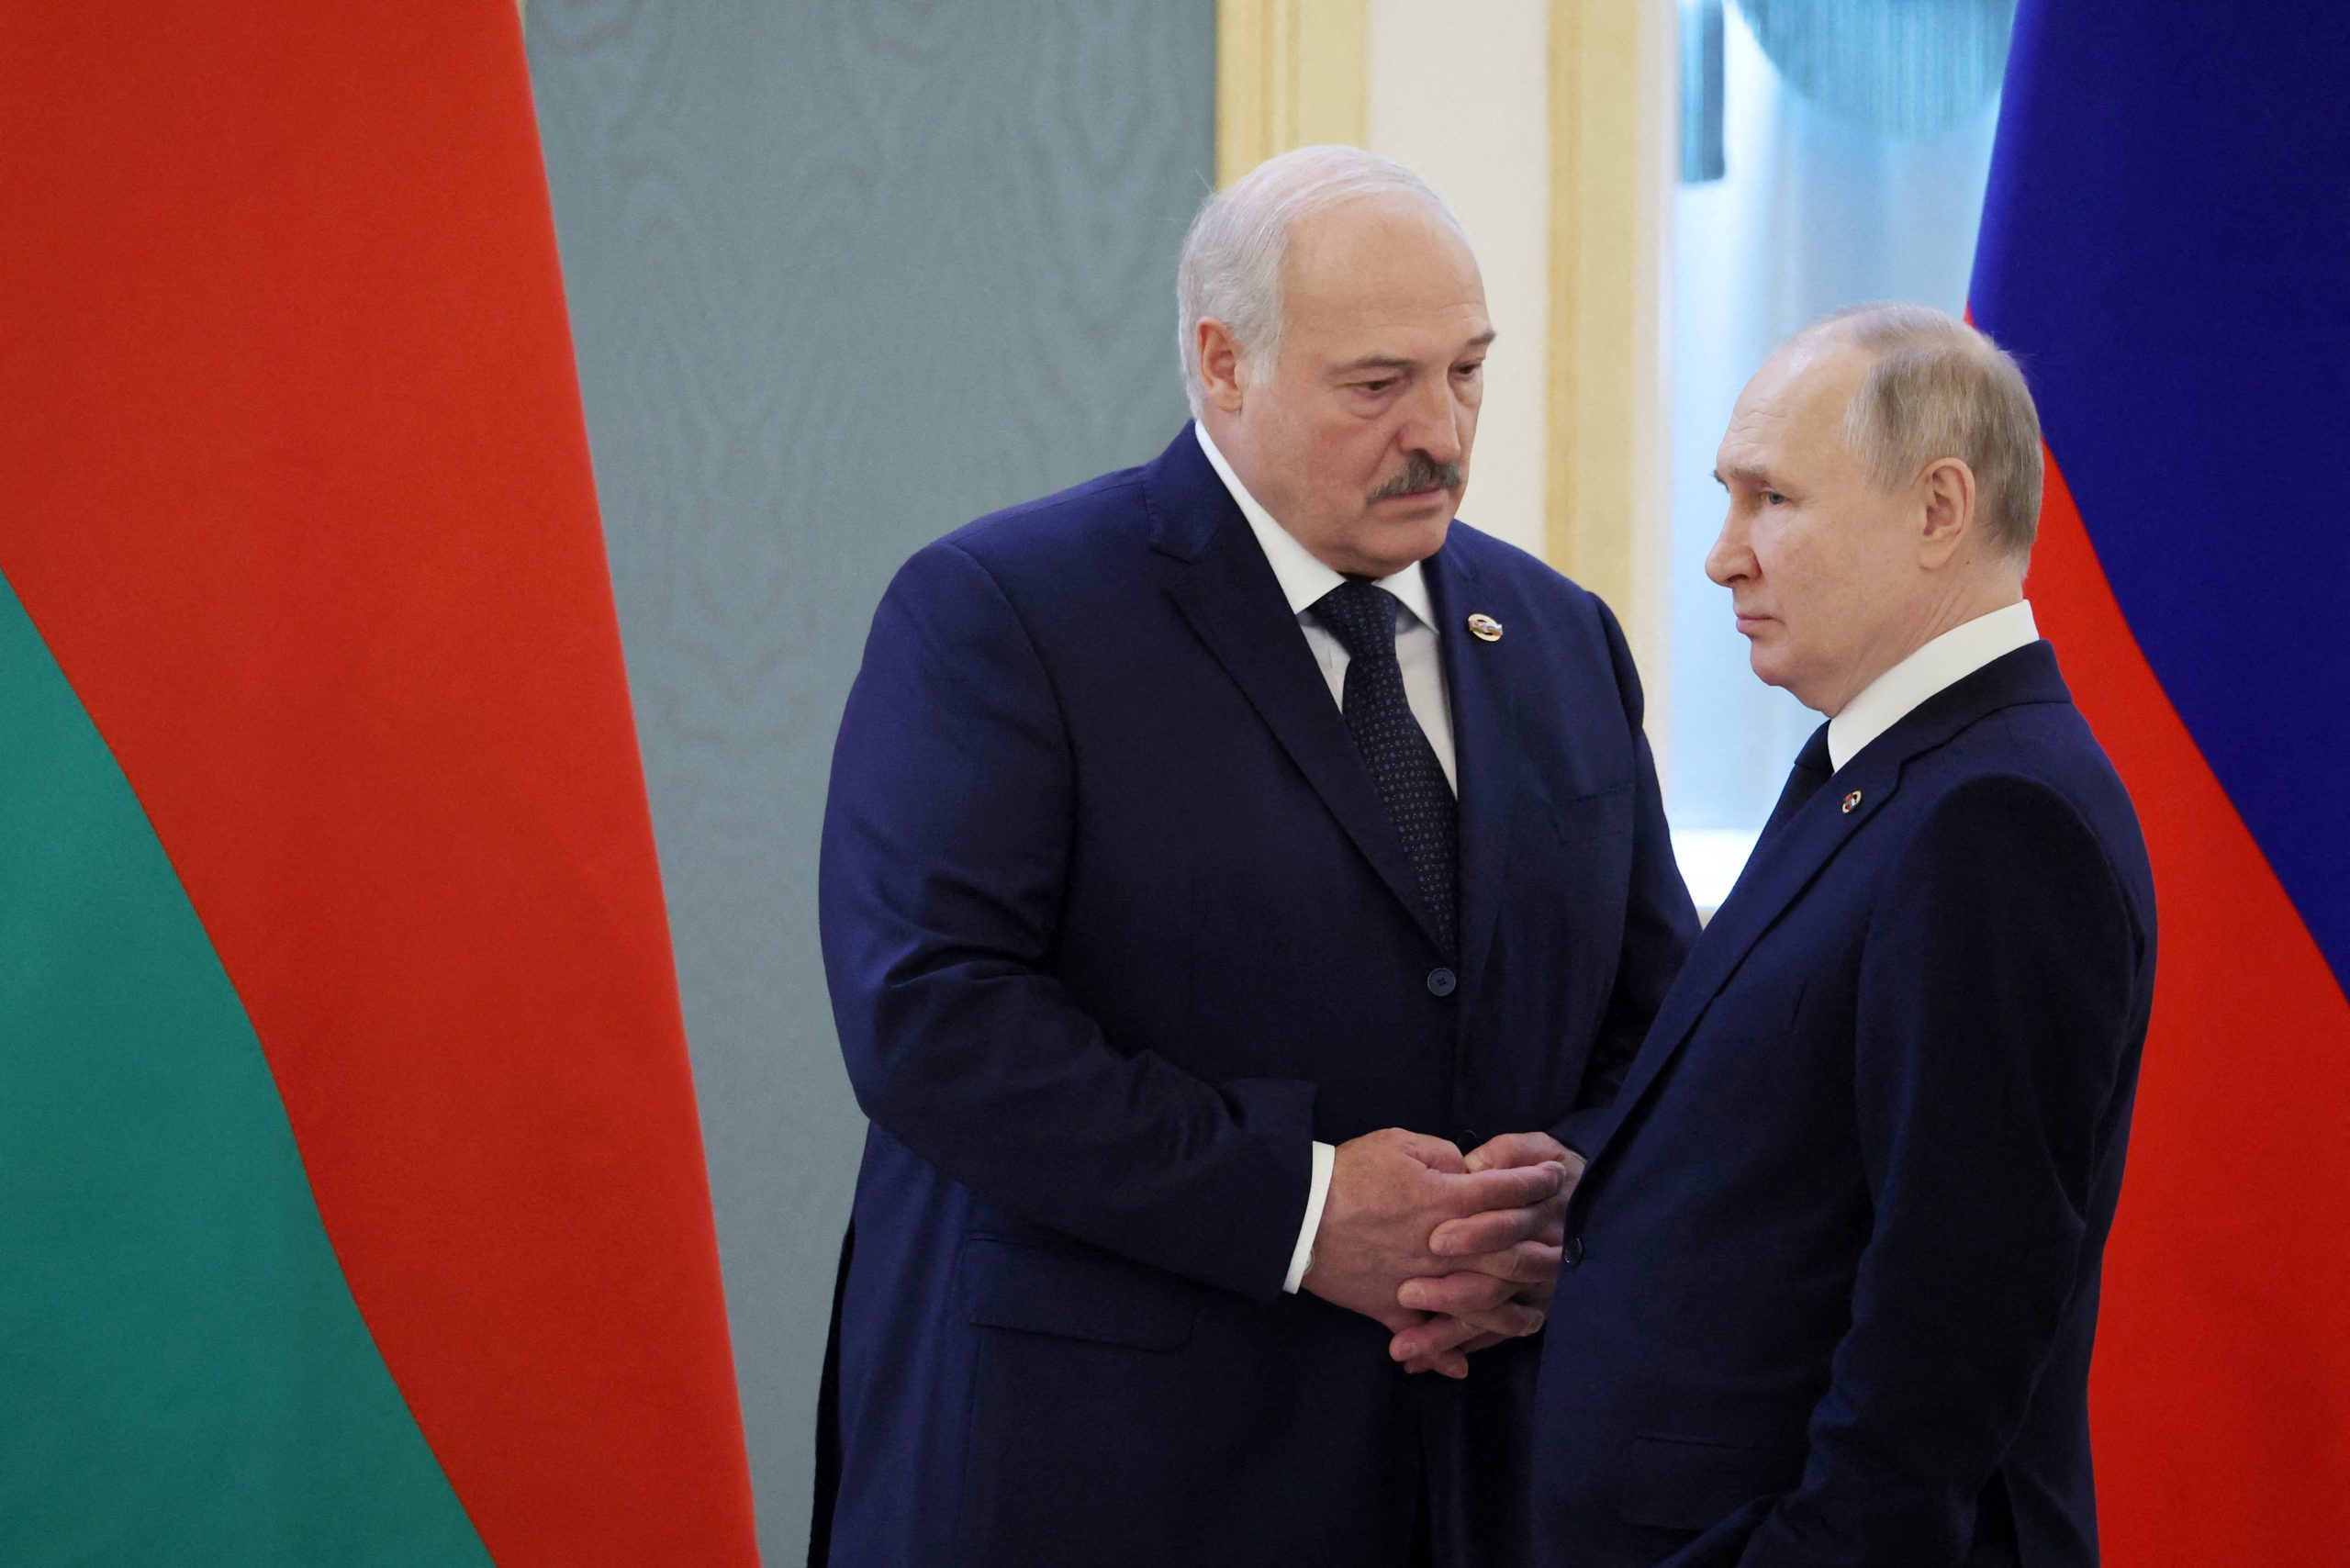 Russian President Vladimir Putin and Belarusian President Alexander Lukashenko attend a meeting of the Supreme State Council of the Union State of Russia and Belarus at the Kremlin in Moscow, Russia April 6, 2023. Sputnik/Mikhail Klimentyev/Kremlin via REUTERS ATTENTION EDITORS - THIS IMAGE WAS PROVIDED BY A THIRD PARTY. TPX IMAGES OF THE DAY